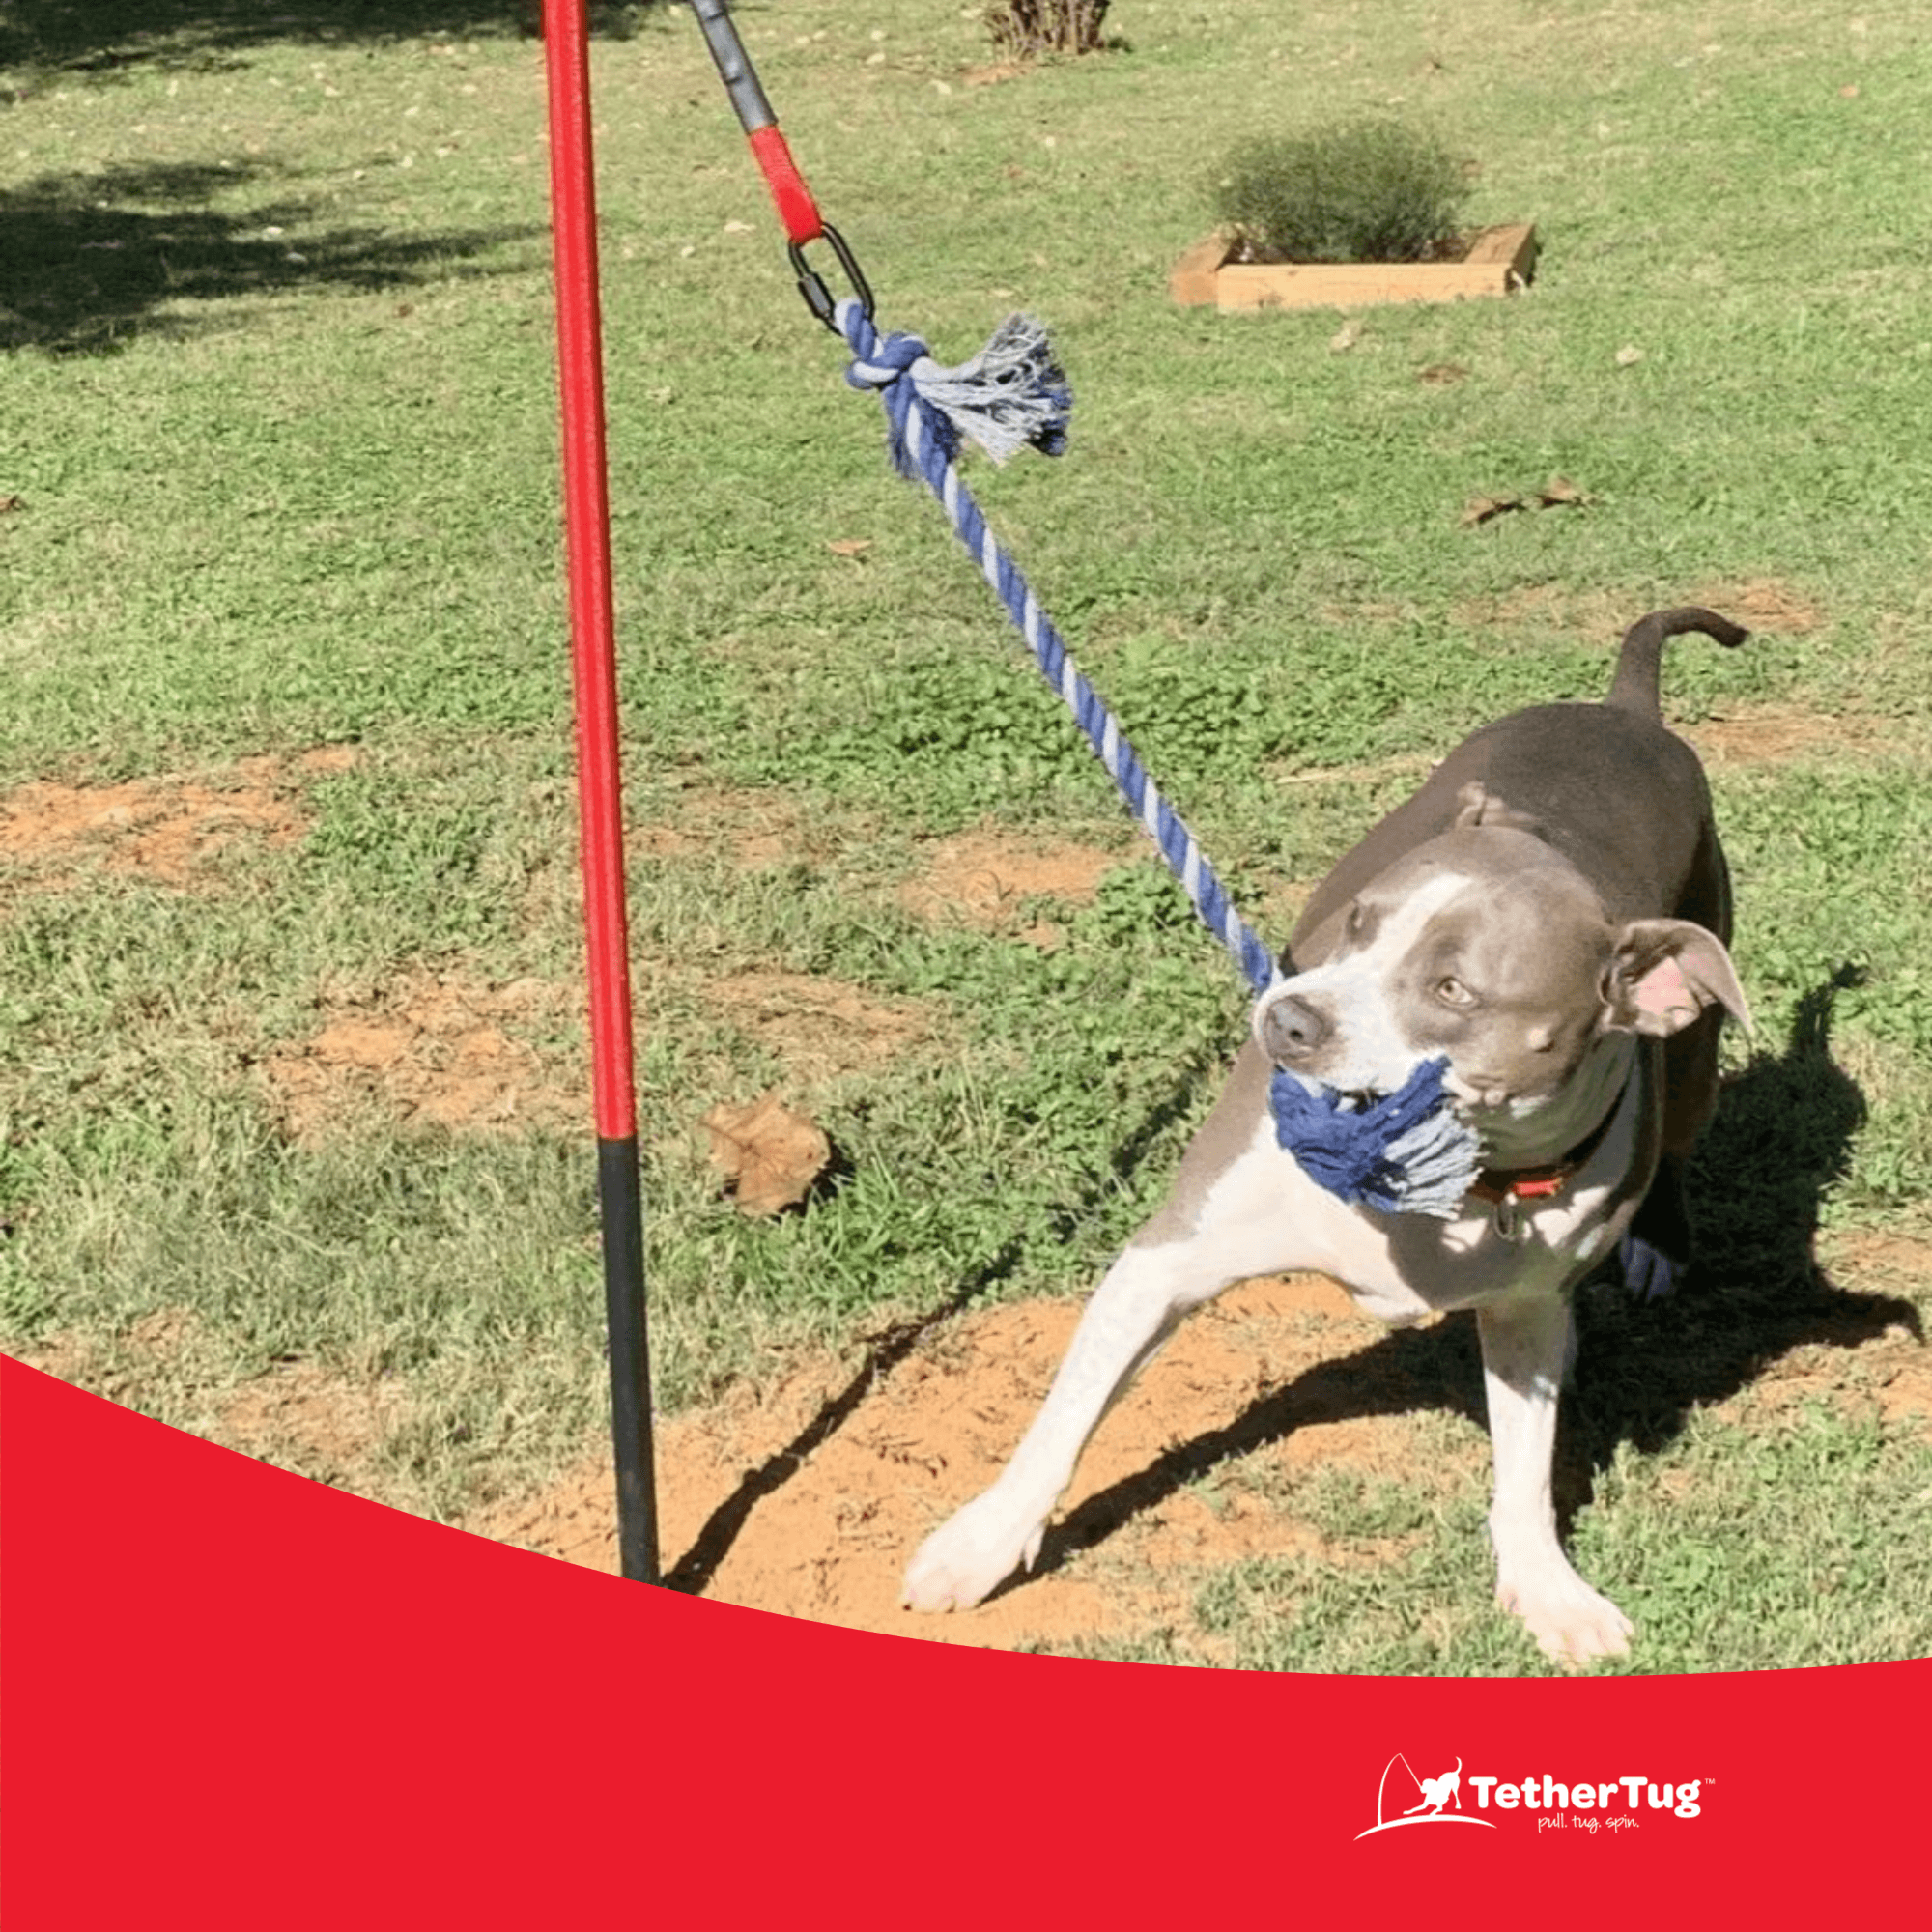 Buy Kelbuna Tether tug Outdoor Dog Toy, Spring Pole for Dogs. Great Flirt  Pole for Dogs Heavy Duty, Spring Pole for Pitbull/Dog tug Toy - Stainless  Steel Spring, swivels, Carabiner & Bonus